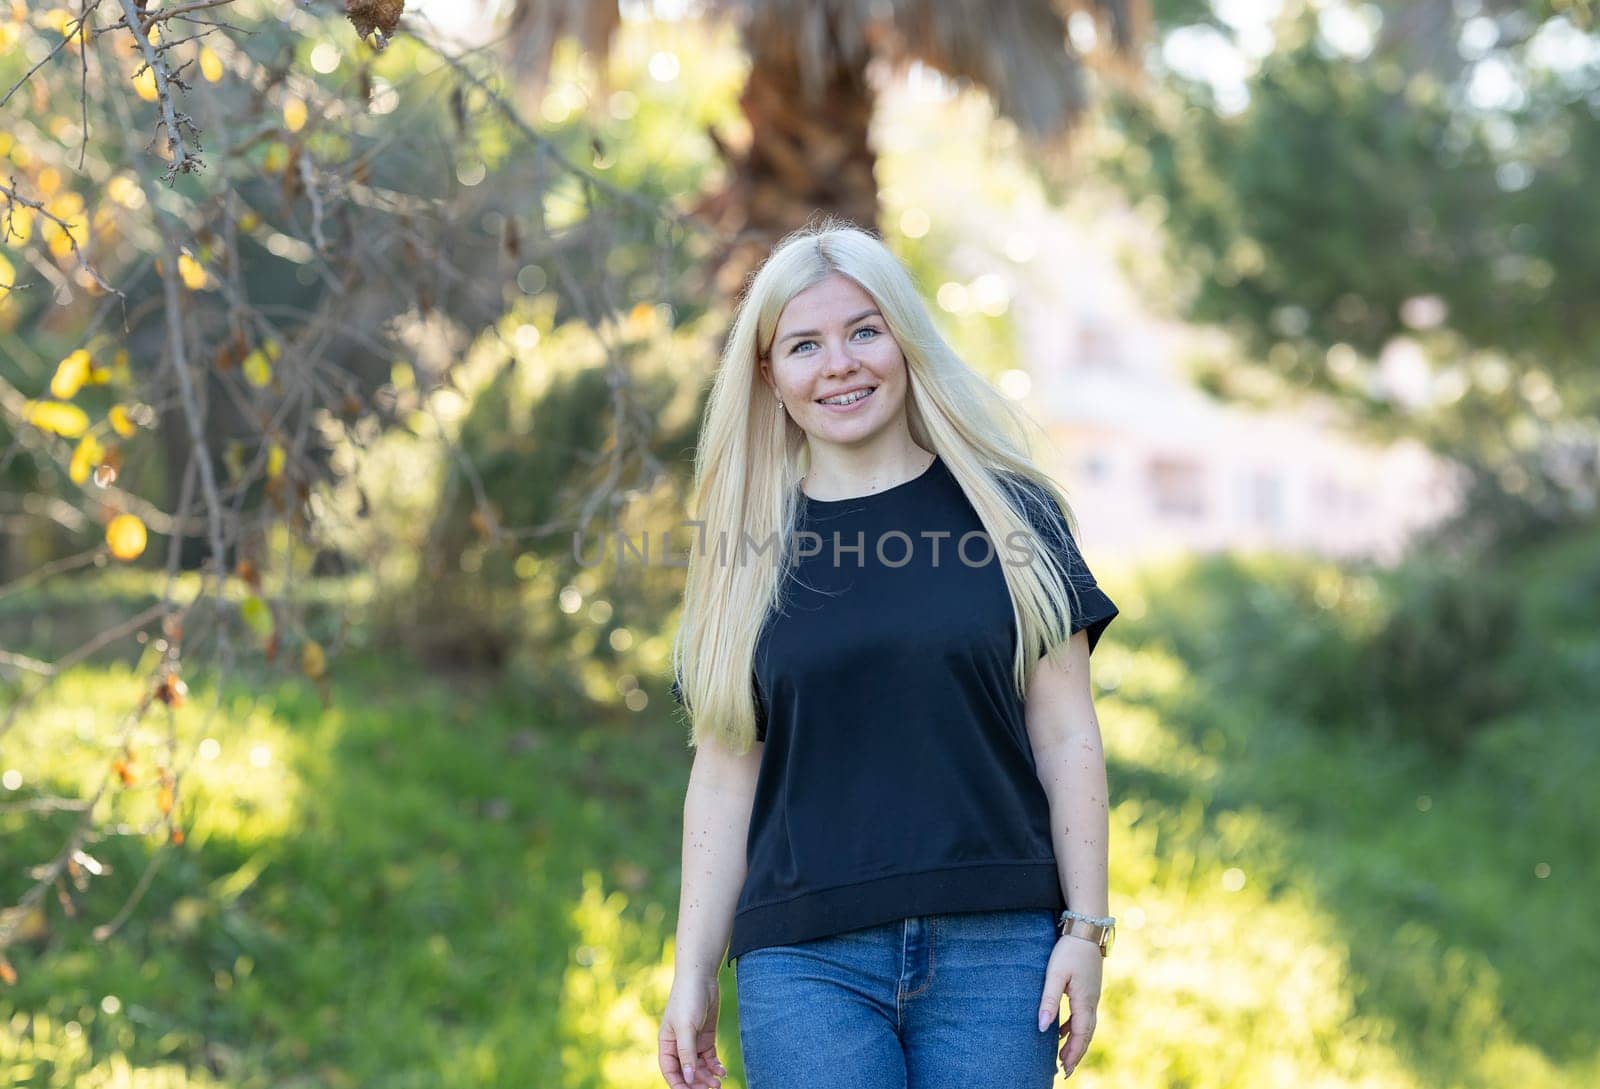 Smiling Woman with braces With Blonde Hair in Grass by Studia72